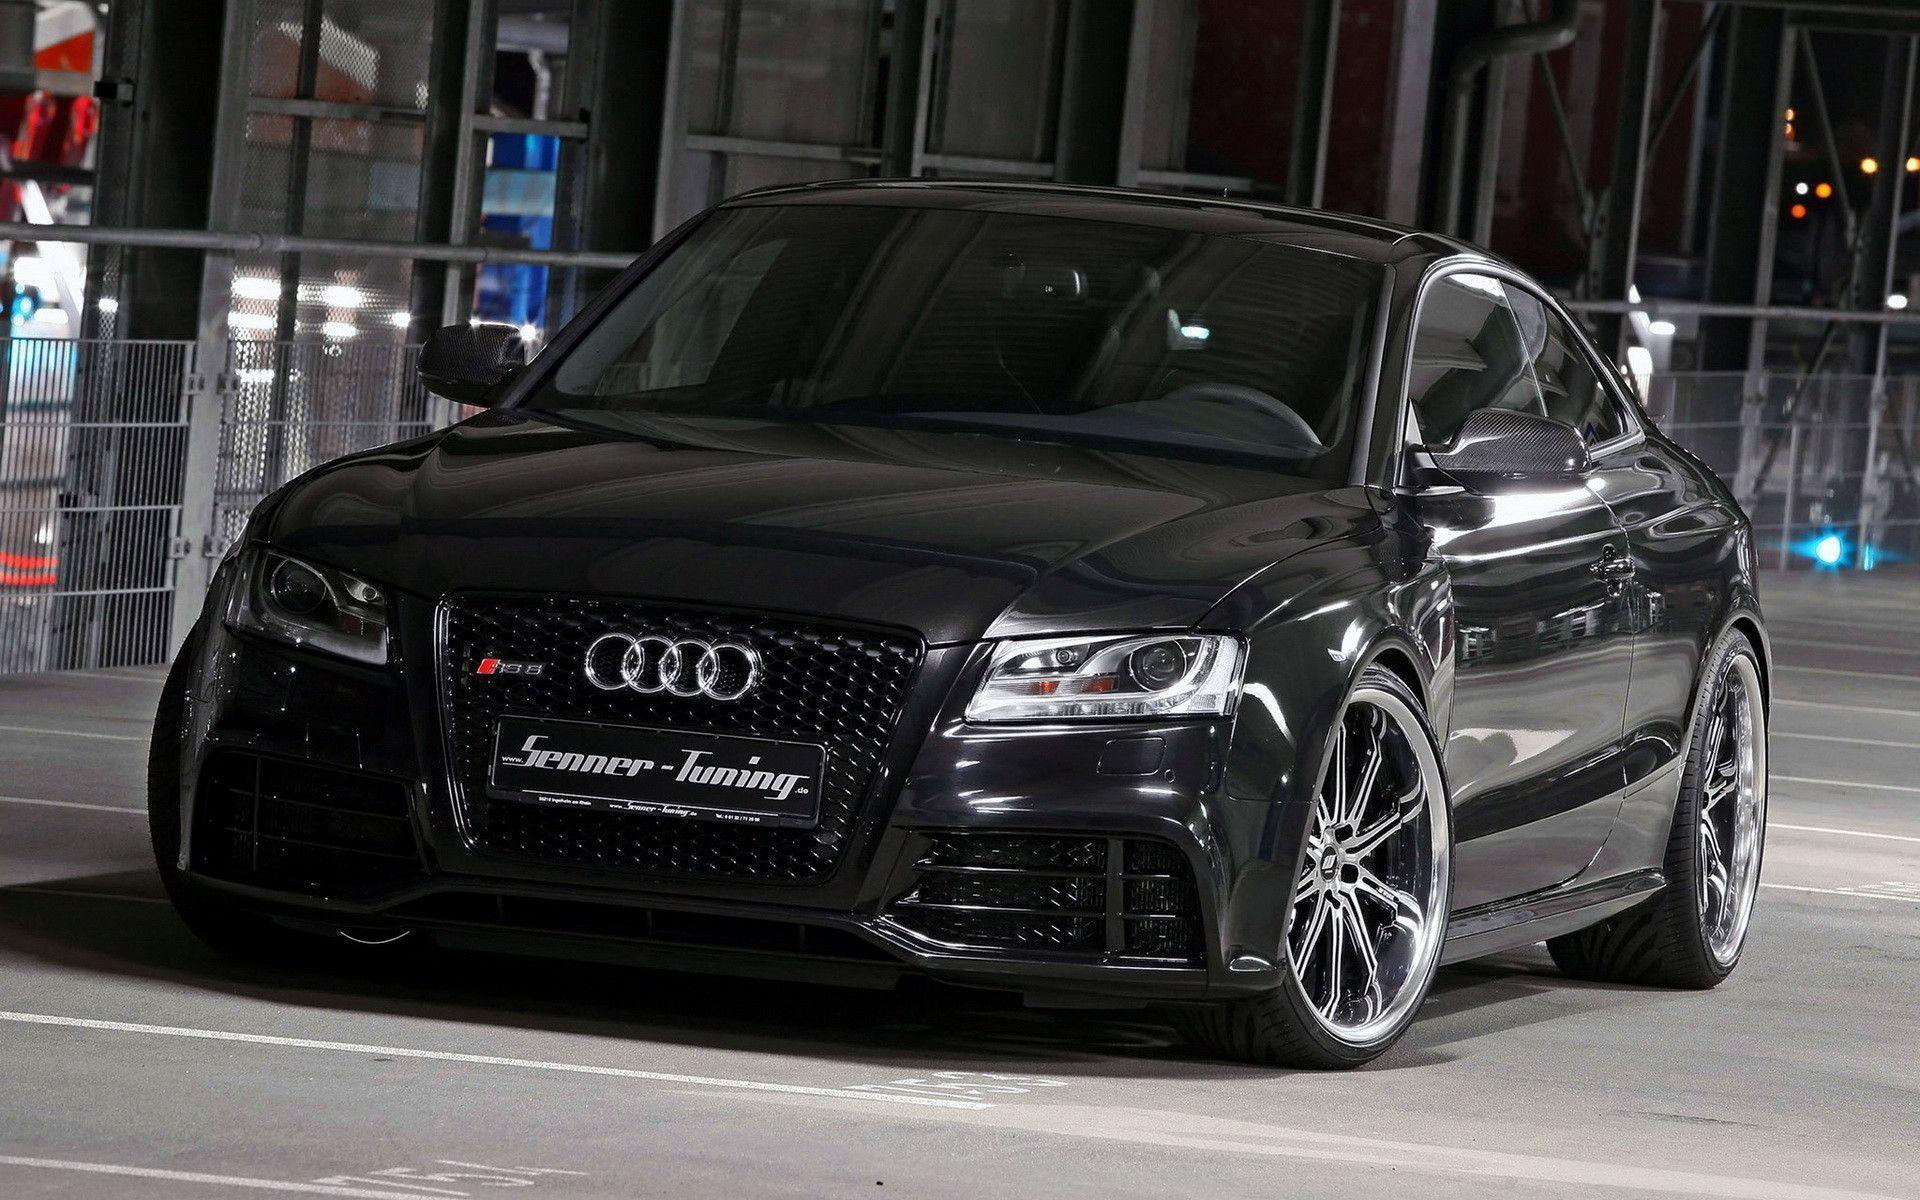 Audi RS5 wallpaper and image, picture, photo